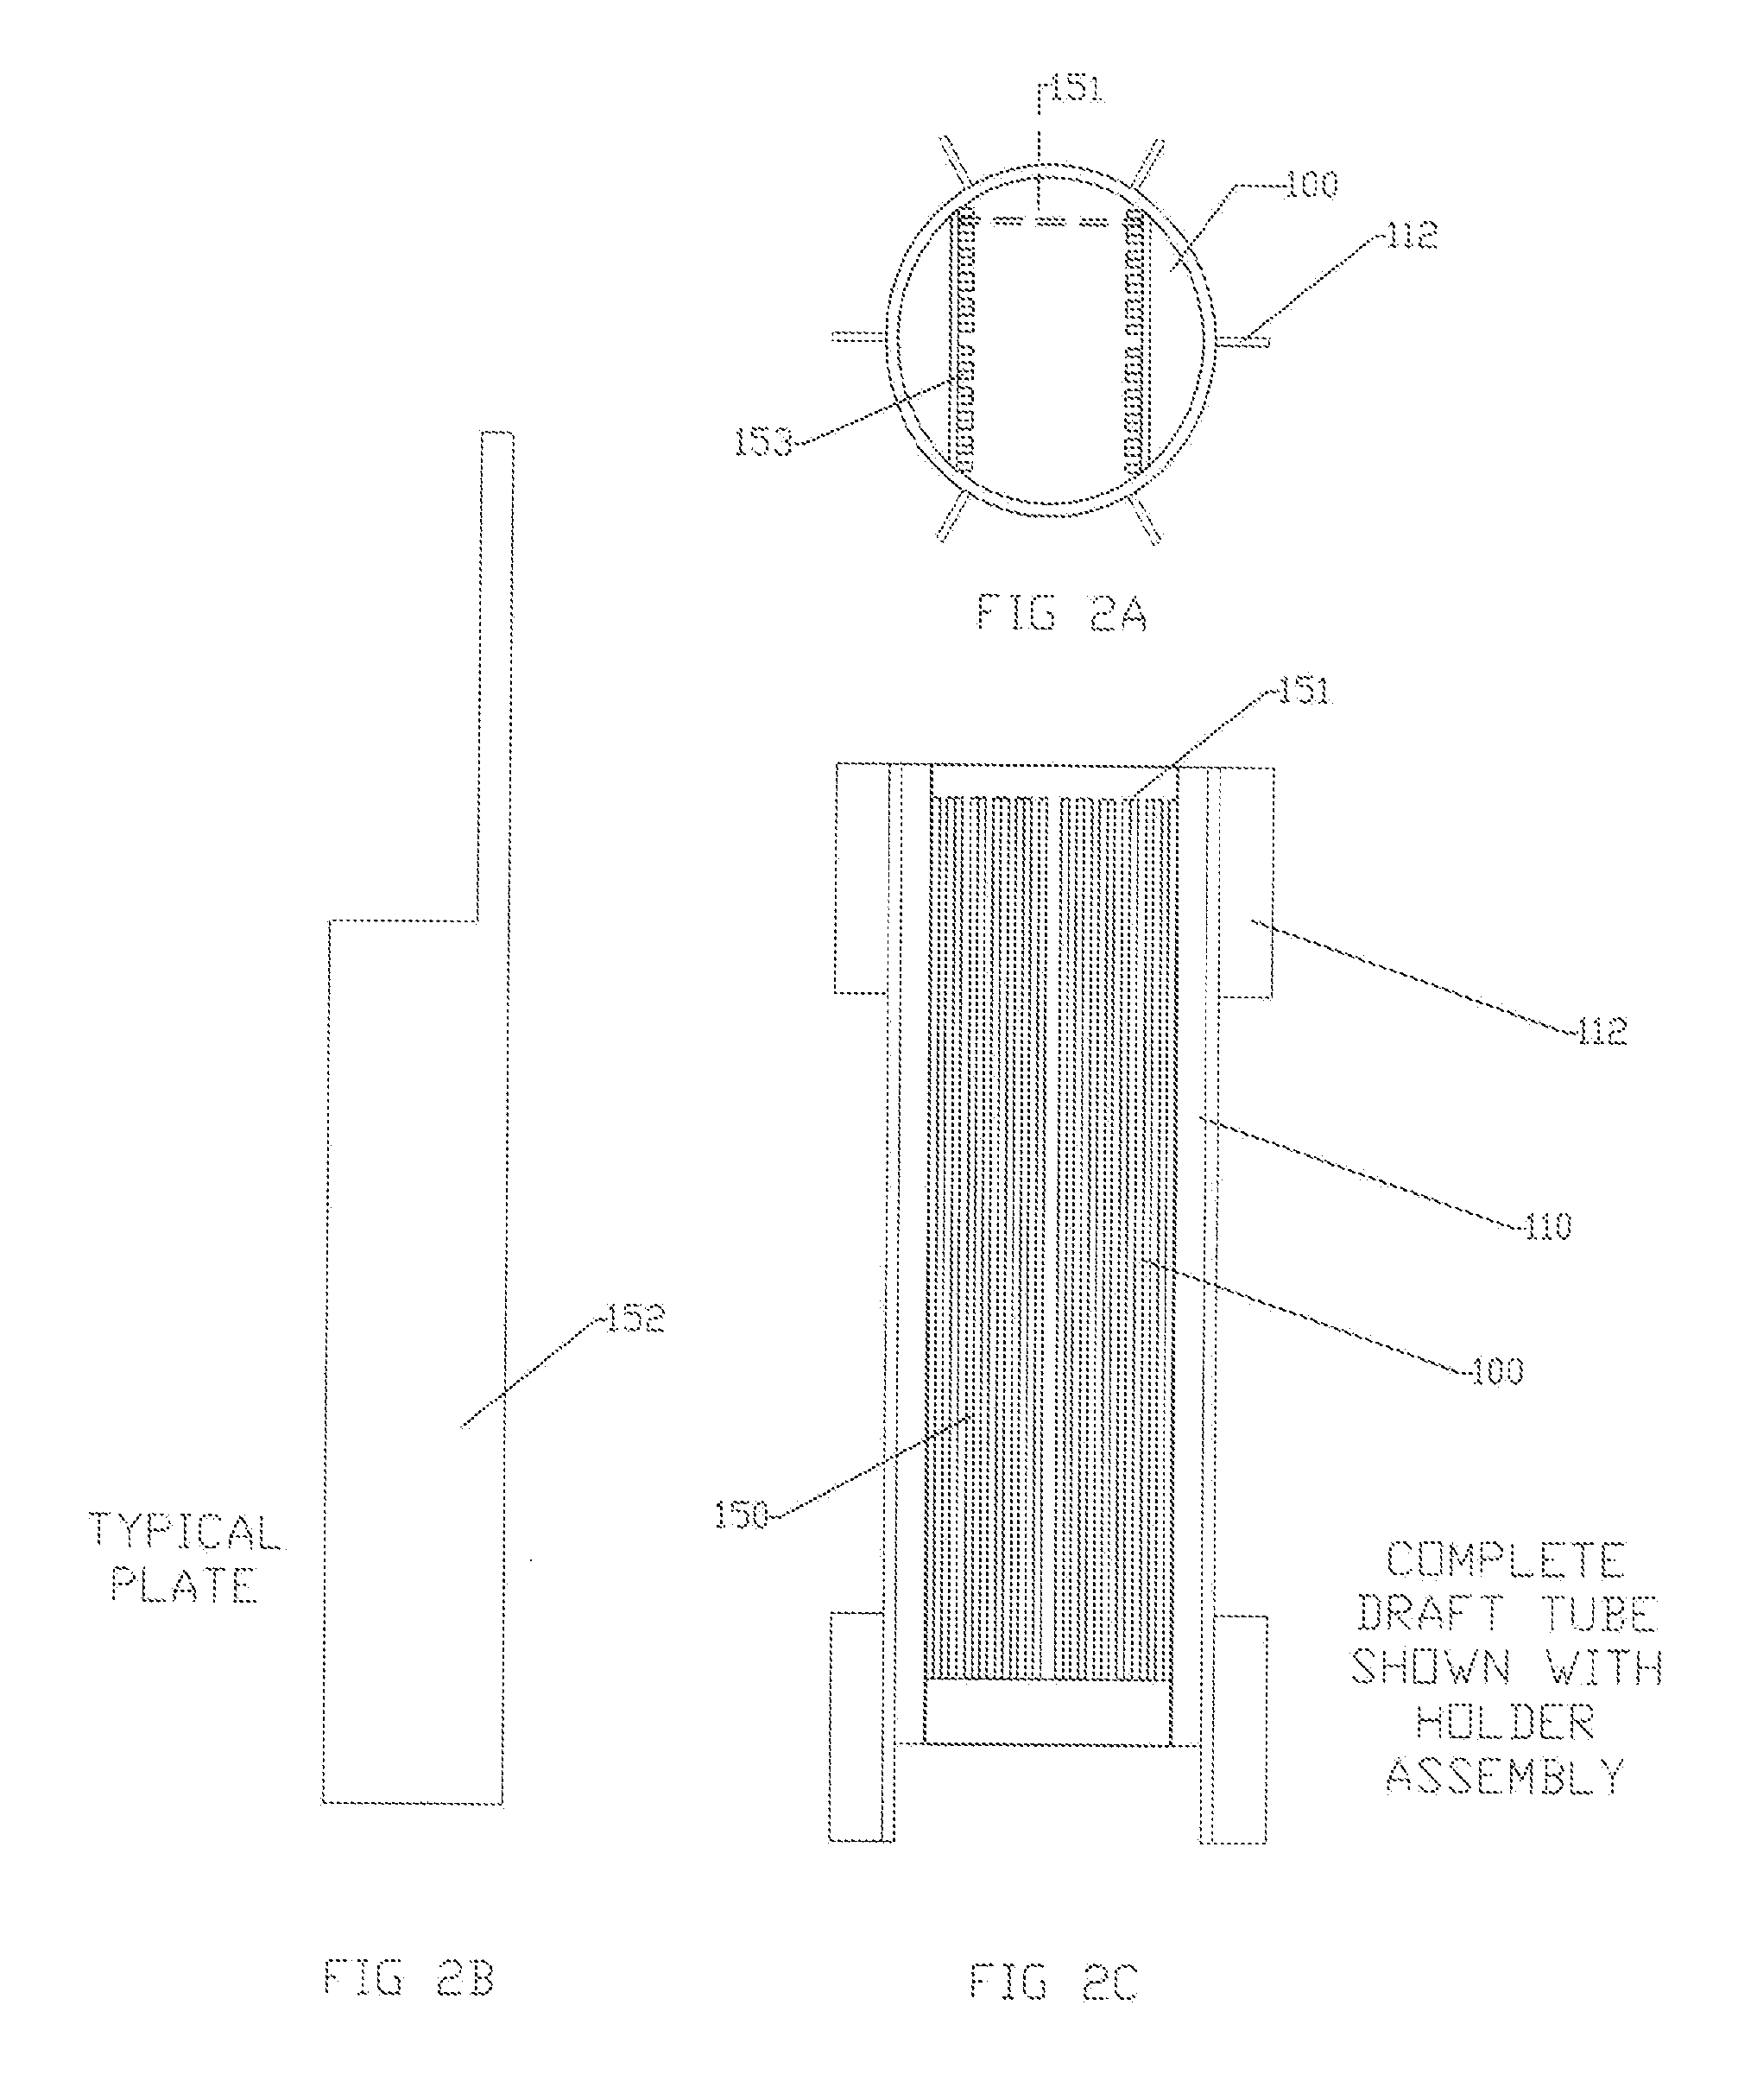 Generation of Chemical Reagents for Various Process Functions Utilizing an Agitated Liquid and Electrically Conductive Environment and an Electro Chemical Cell